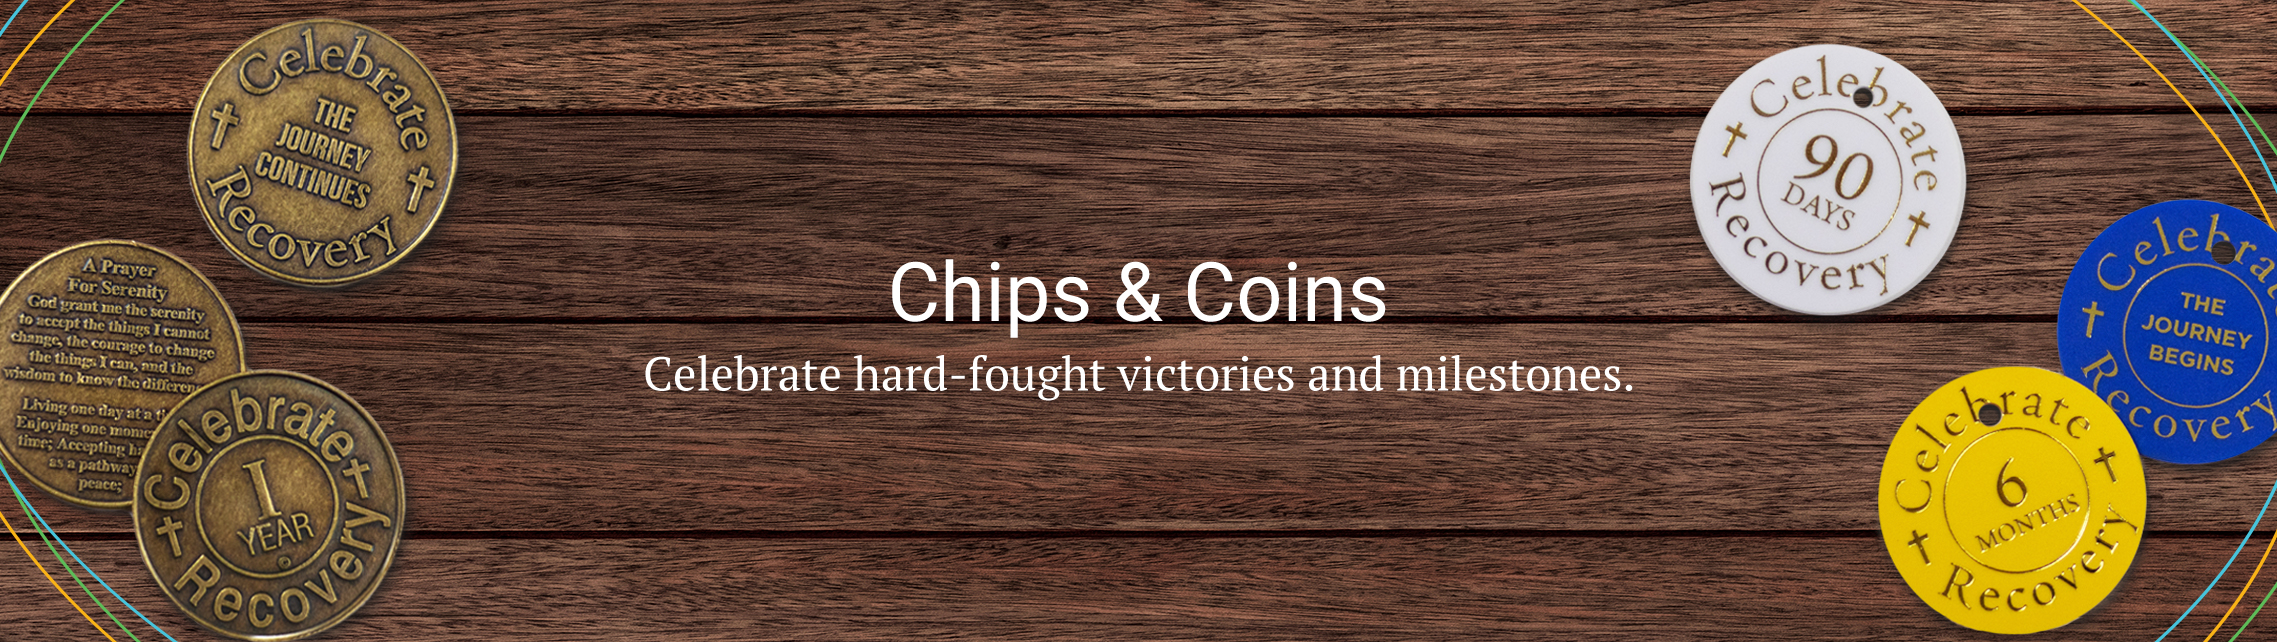 Chips & Coins